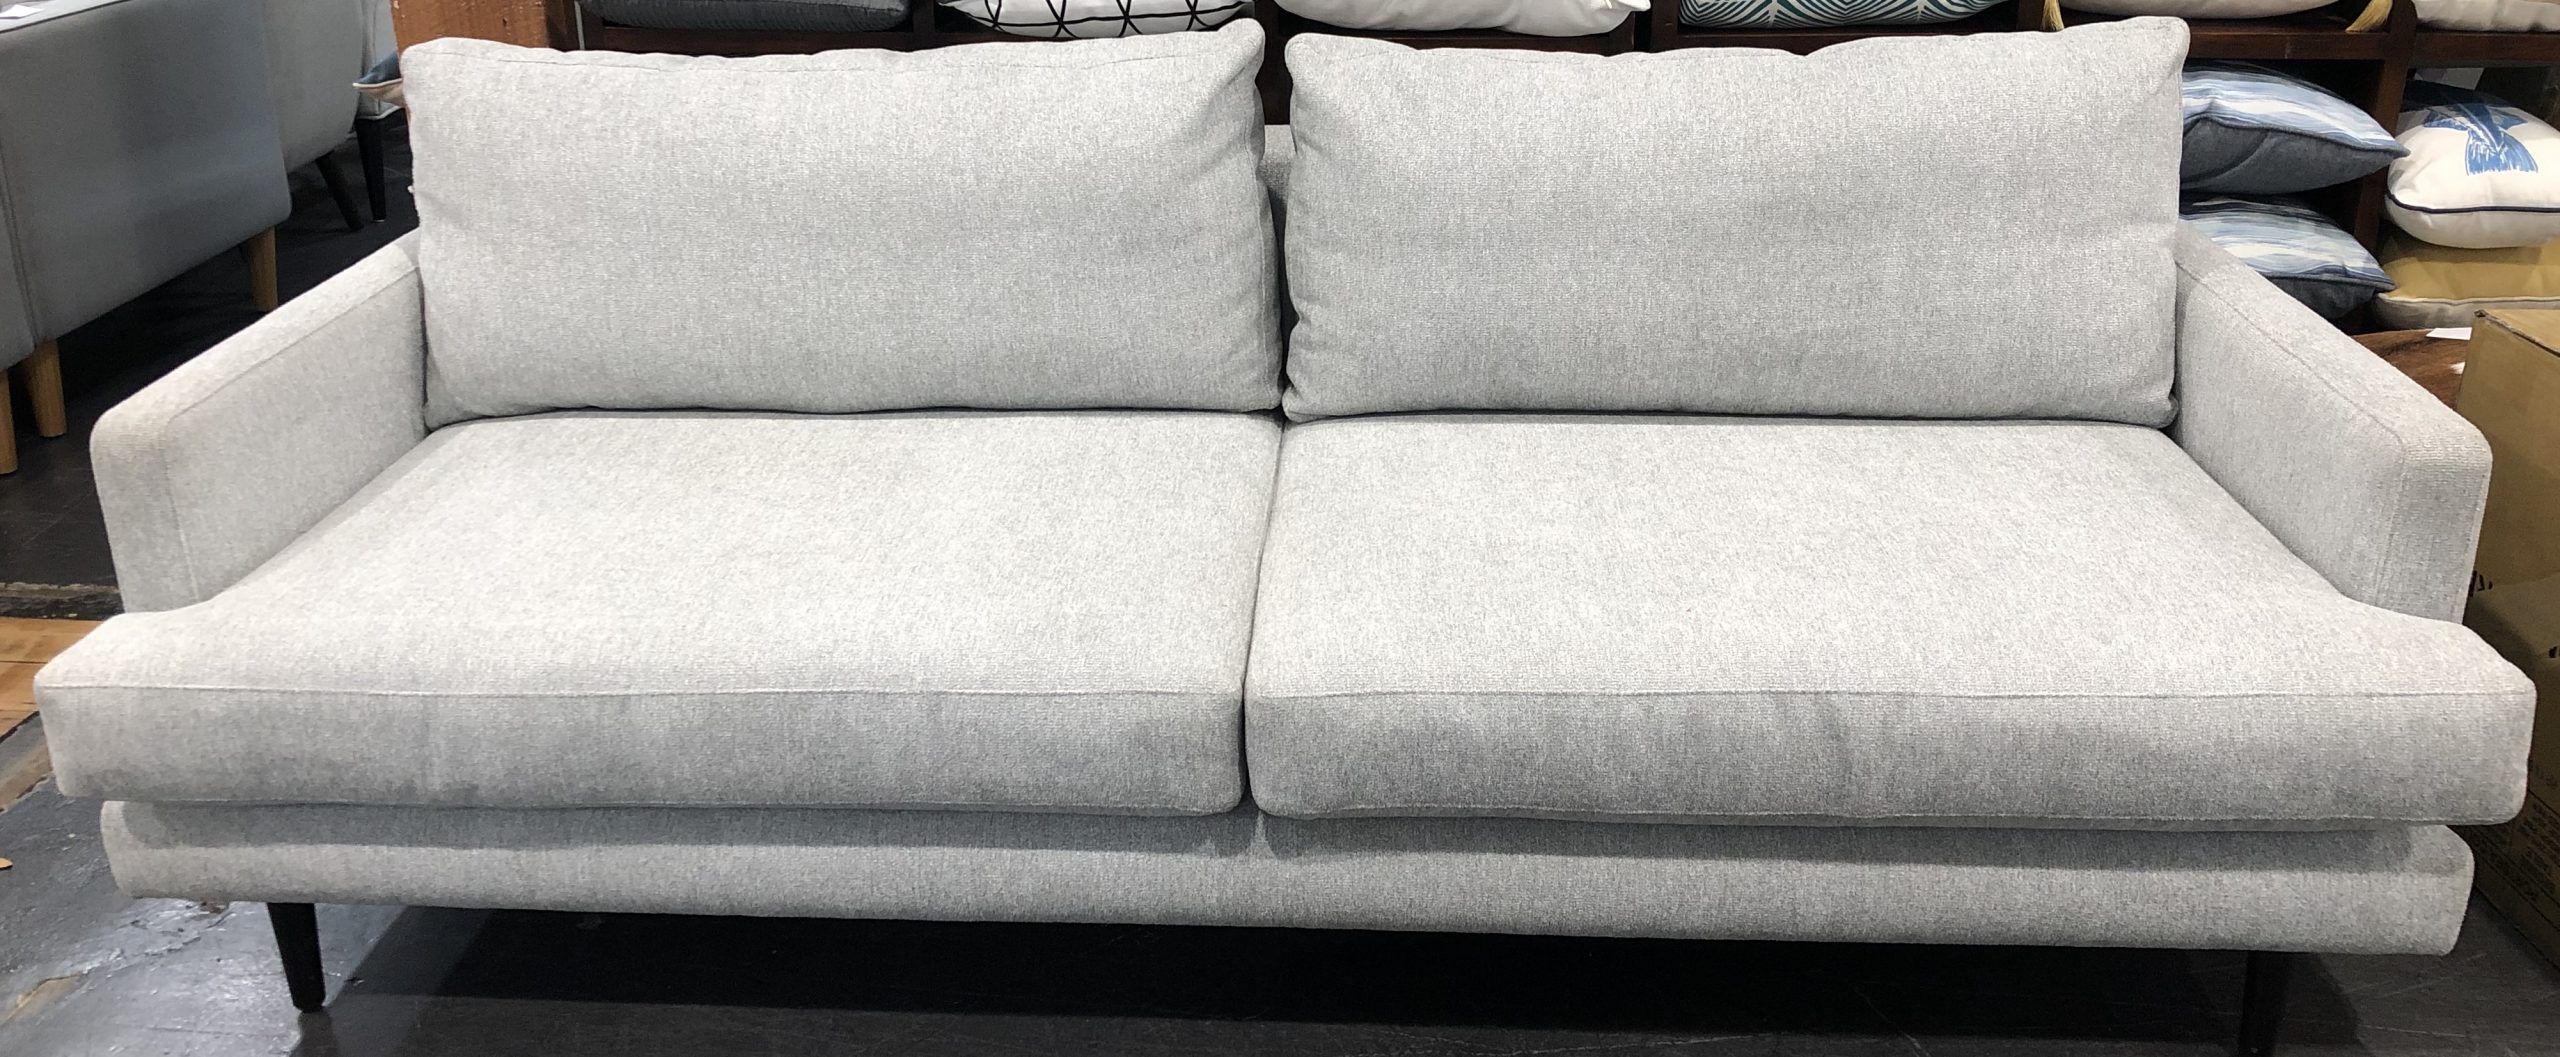 Sofa 3 Seater Oscar In Frontier Silver W2100 x D1000 x H700mm